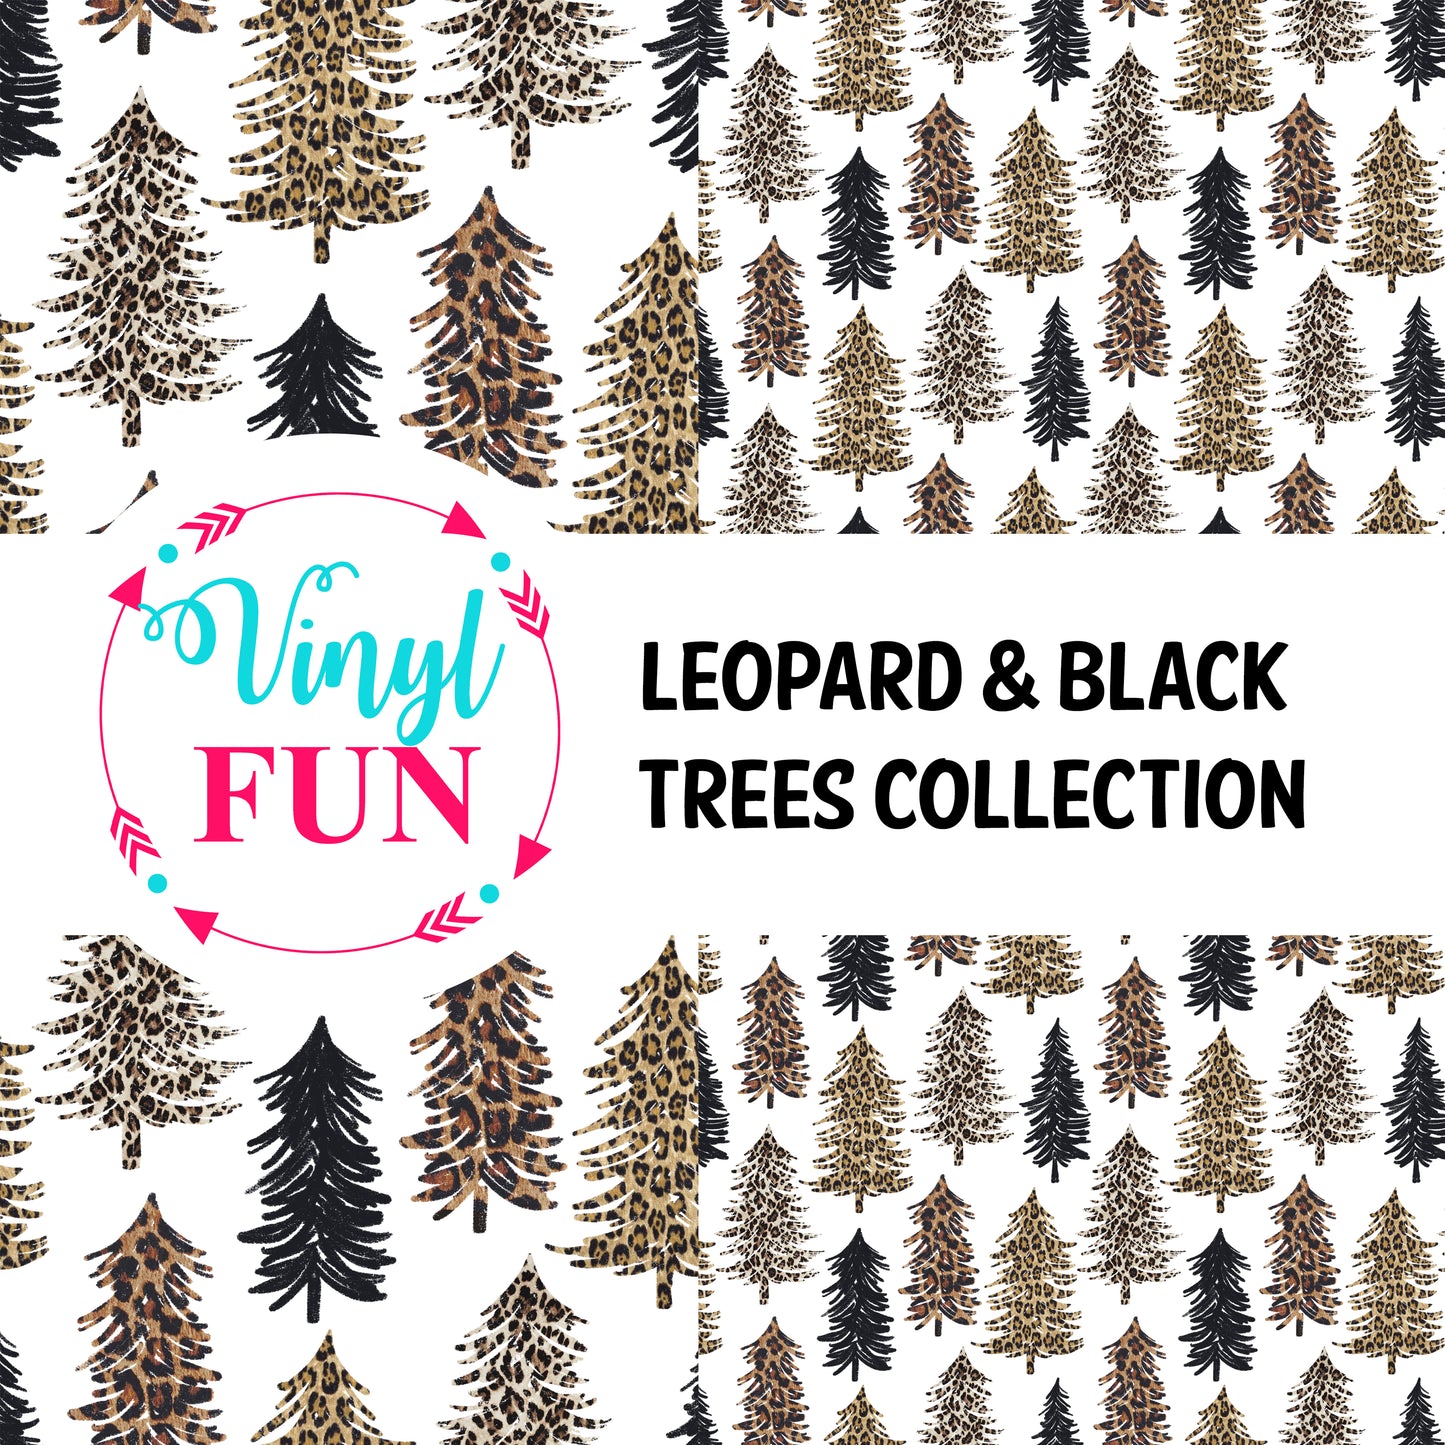 Leopard & Black Trees Collection